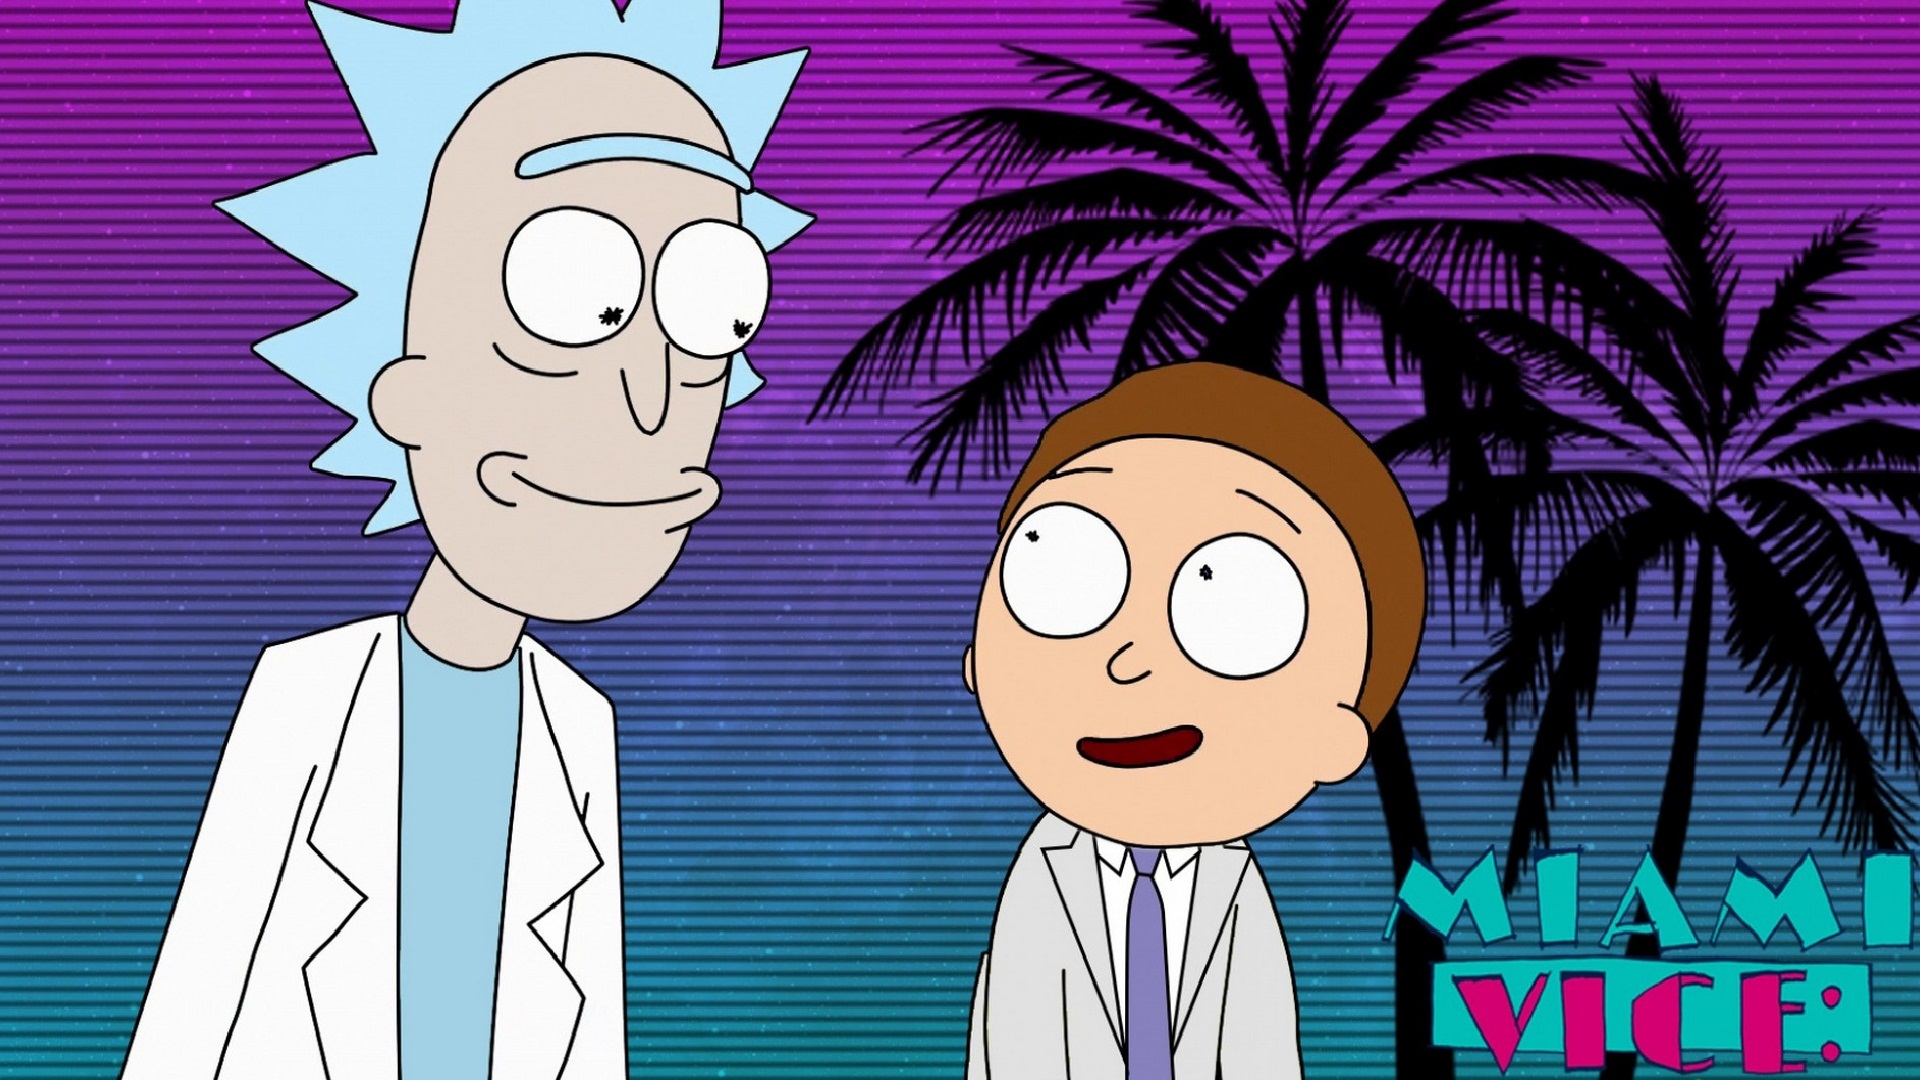 Cartoon Network Rick and Morty Wallpaper with resolution 1920X1080 pixel. You can use this wallpaper as background for your desktop Computer Screensavers, Android or iPhone smartphones